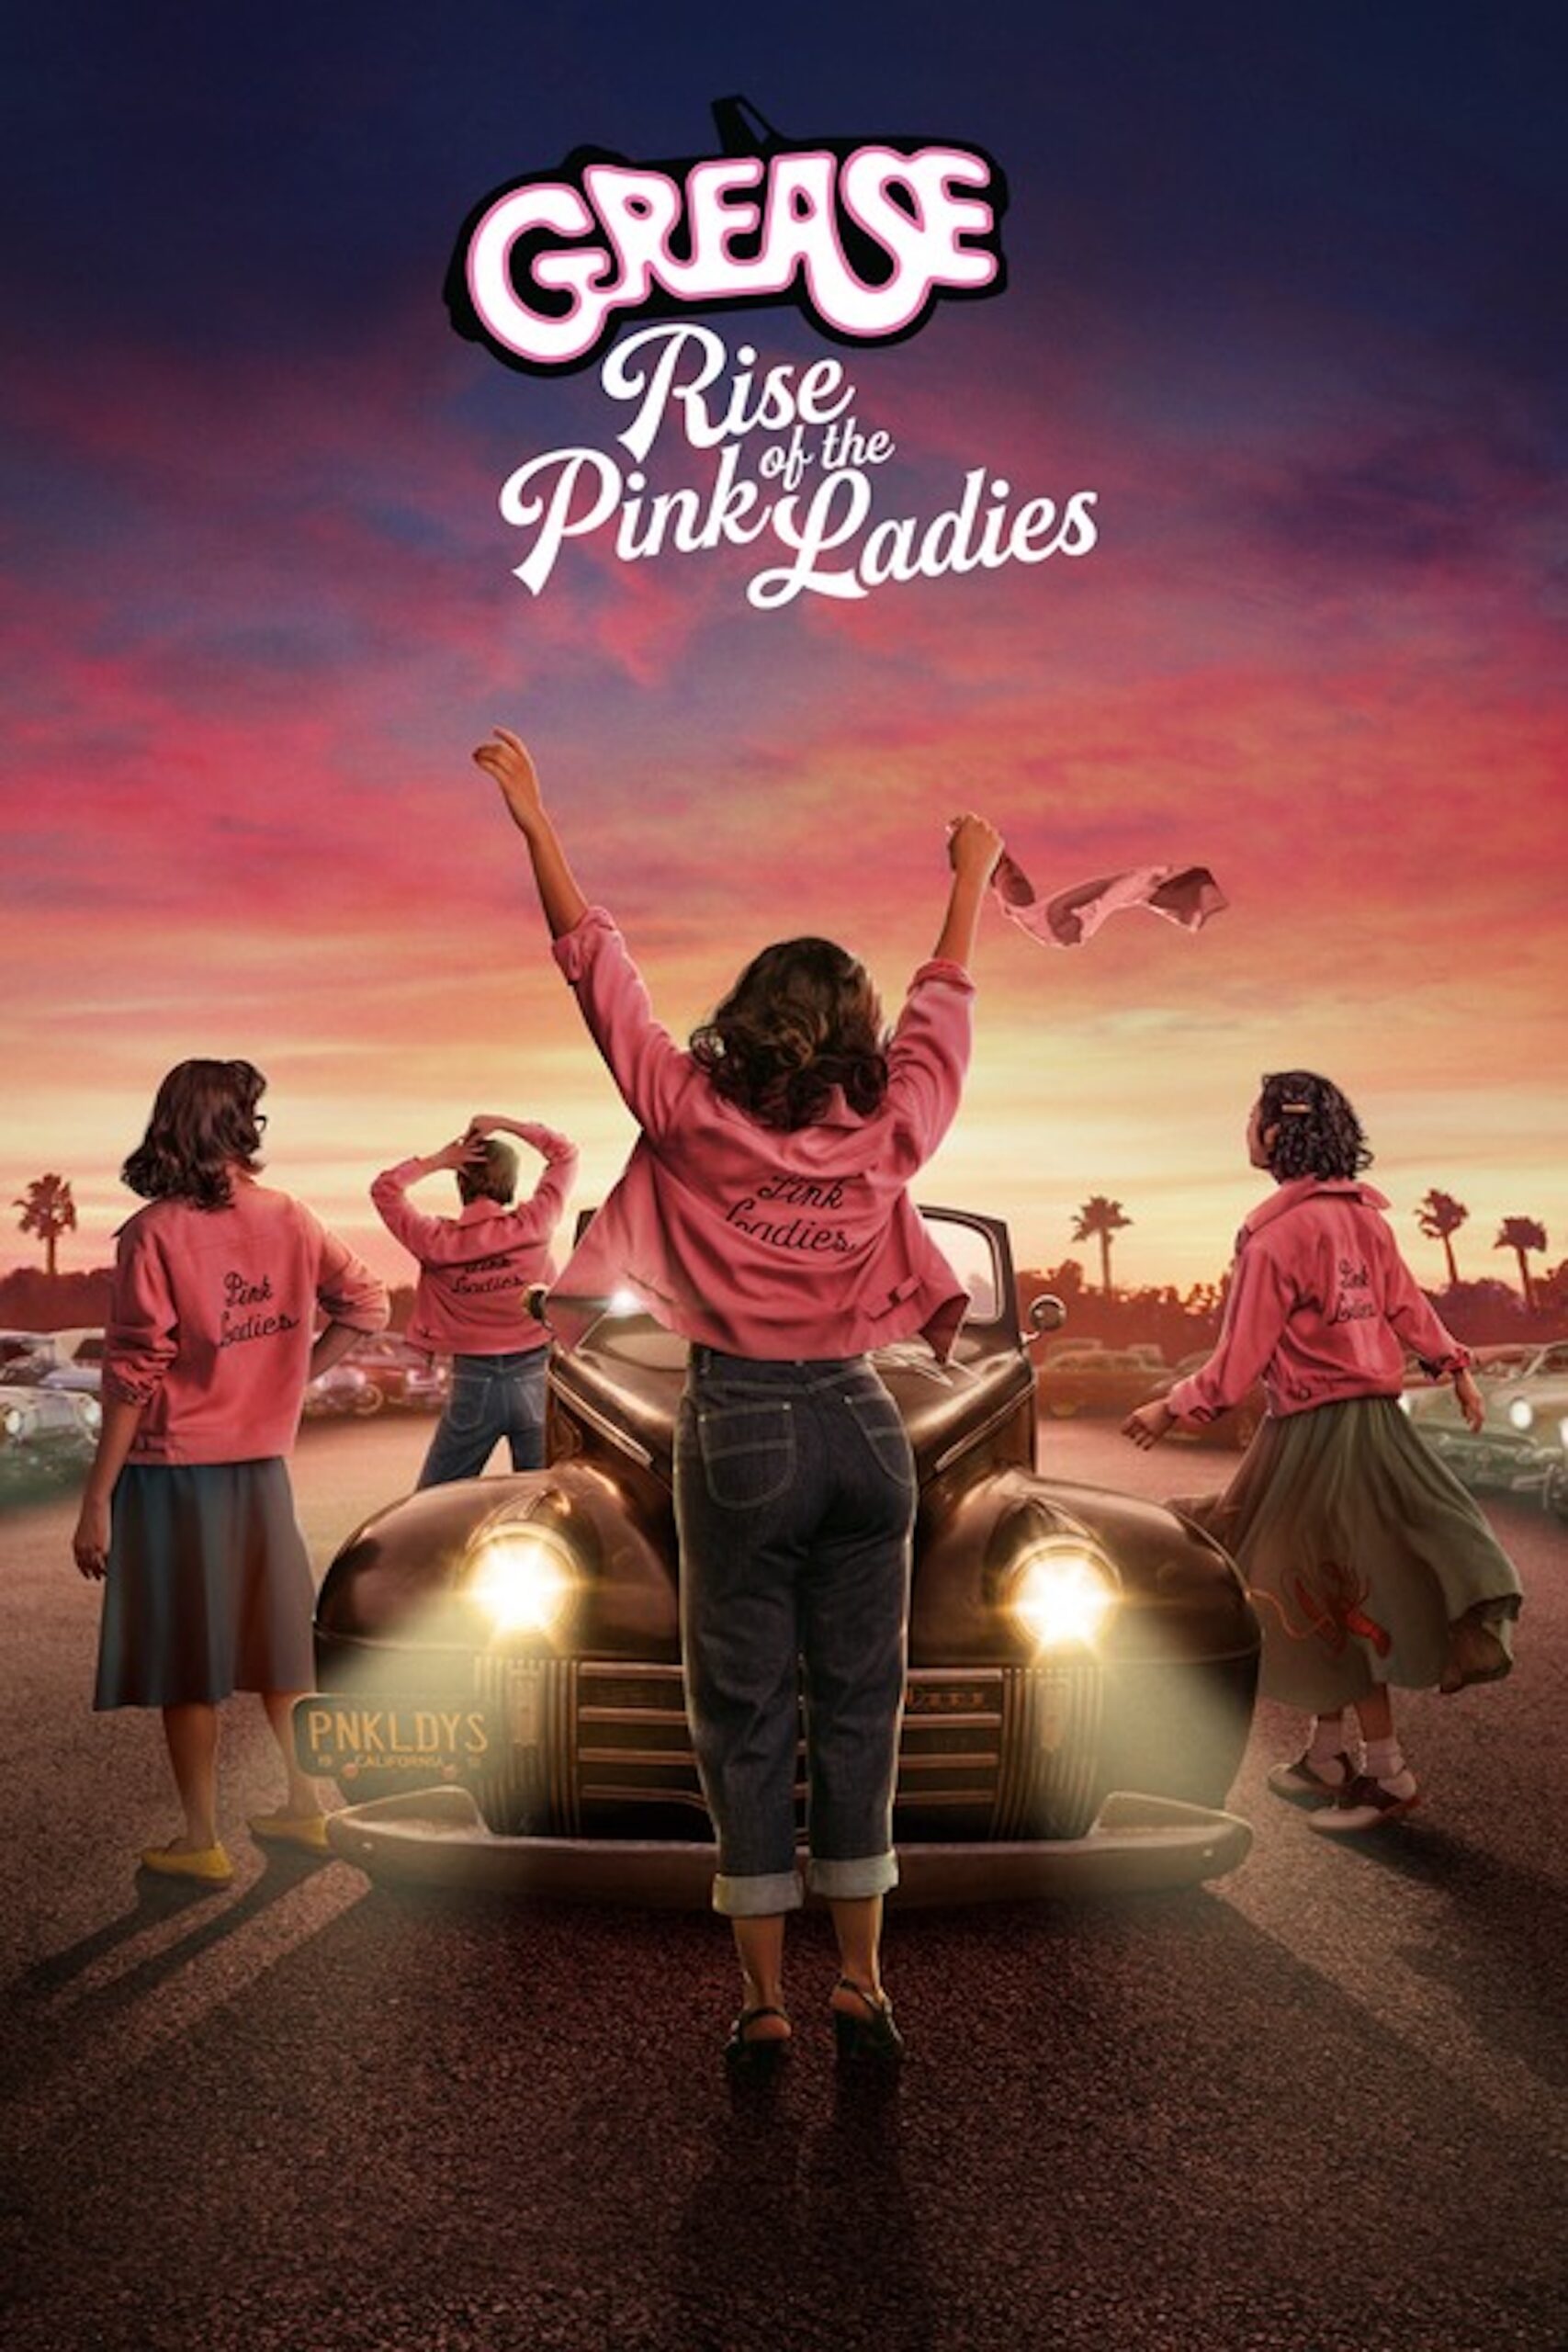 rise of the pink ladies saved by dvd and vod release after fan outcry